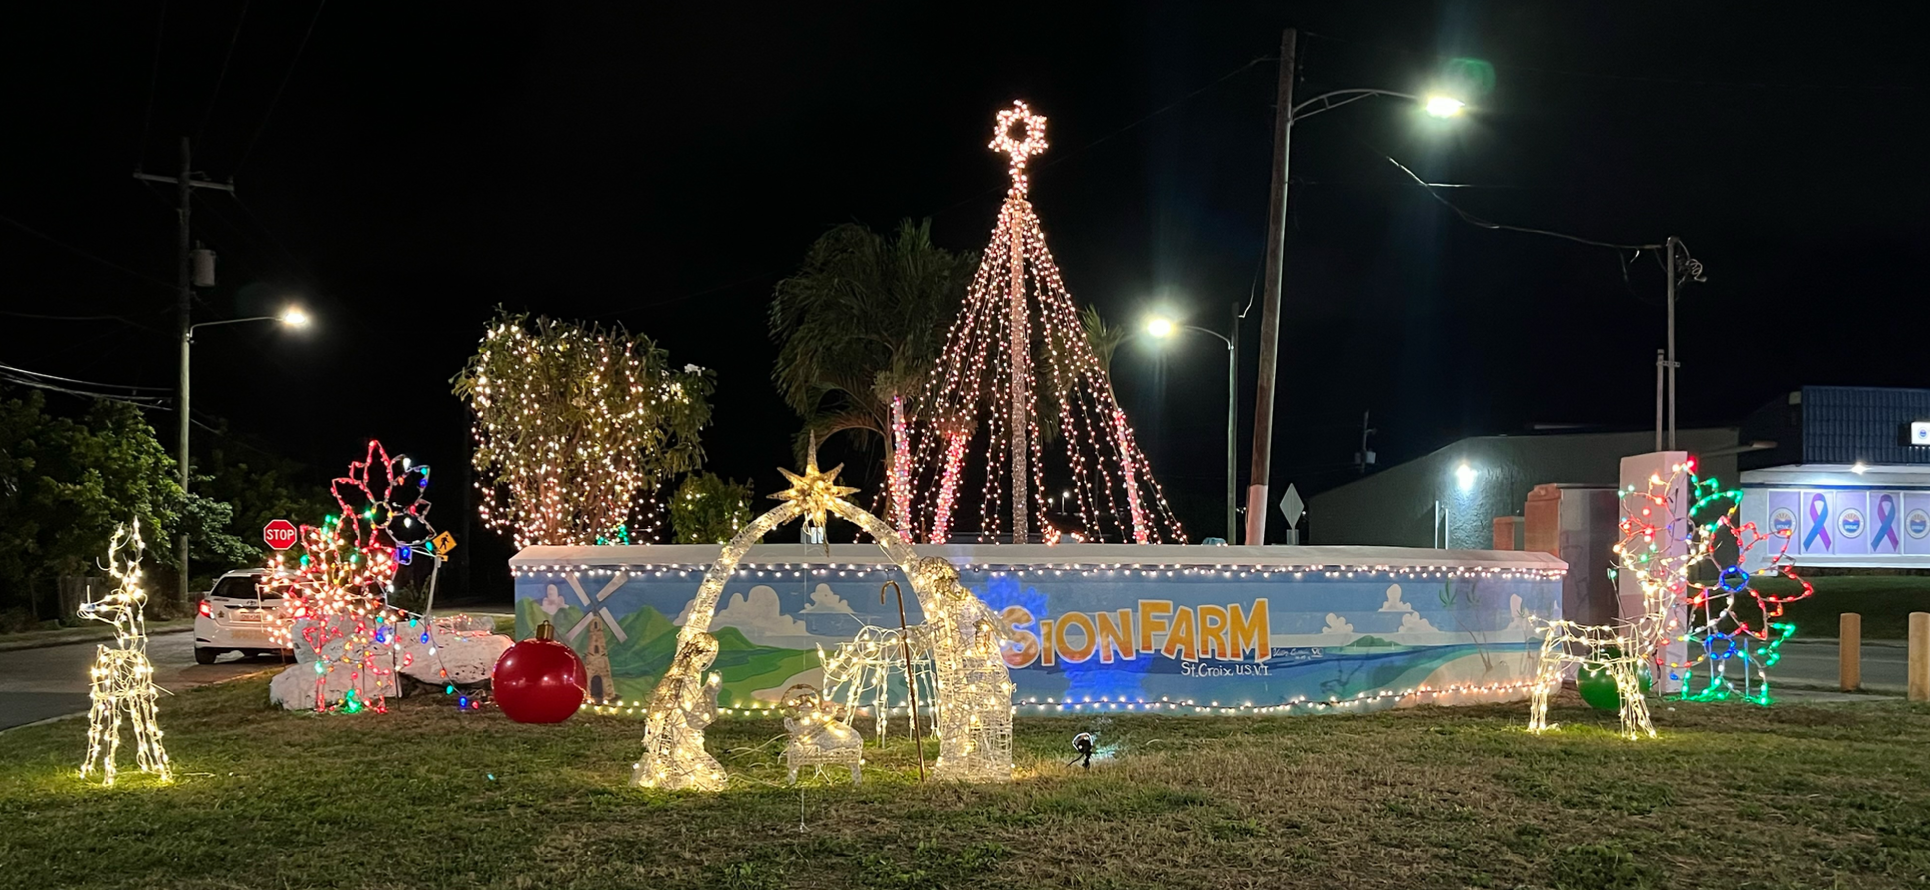 The residents of Sion Farm on St. Croix have decorated the entrance to their neighborhood with a festive and bright holiday scene. (Submitted photo)